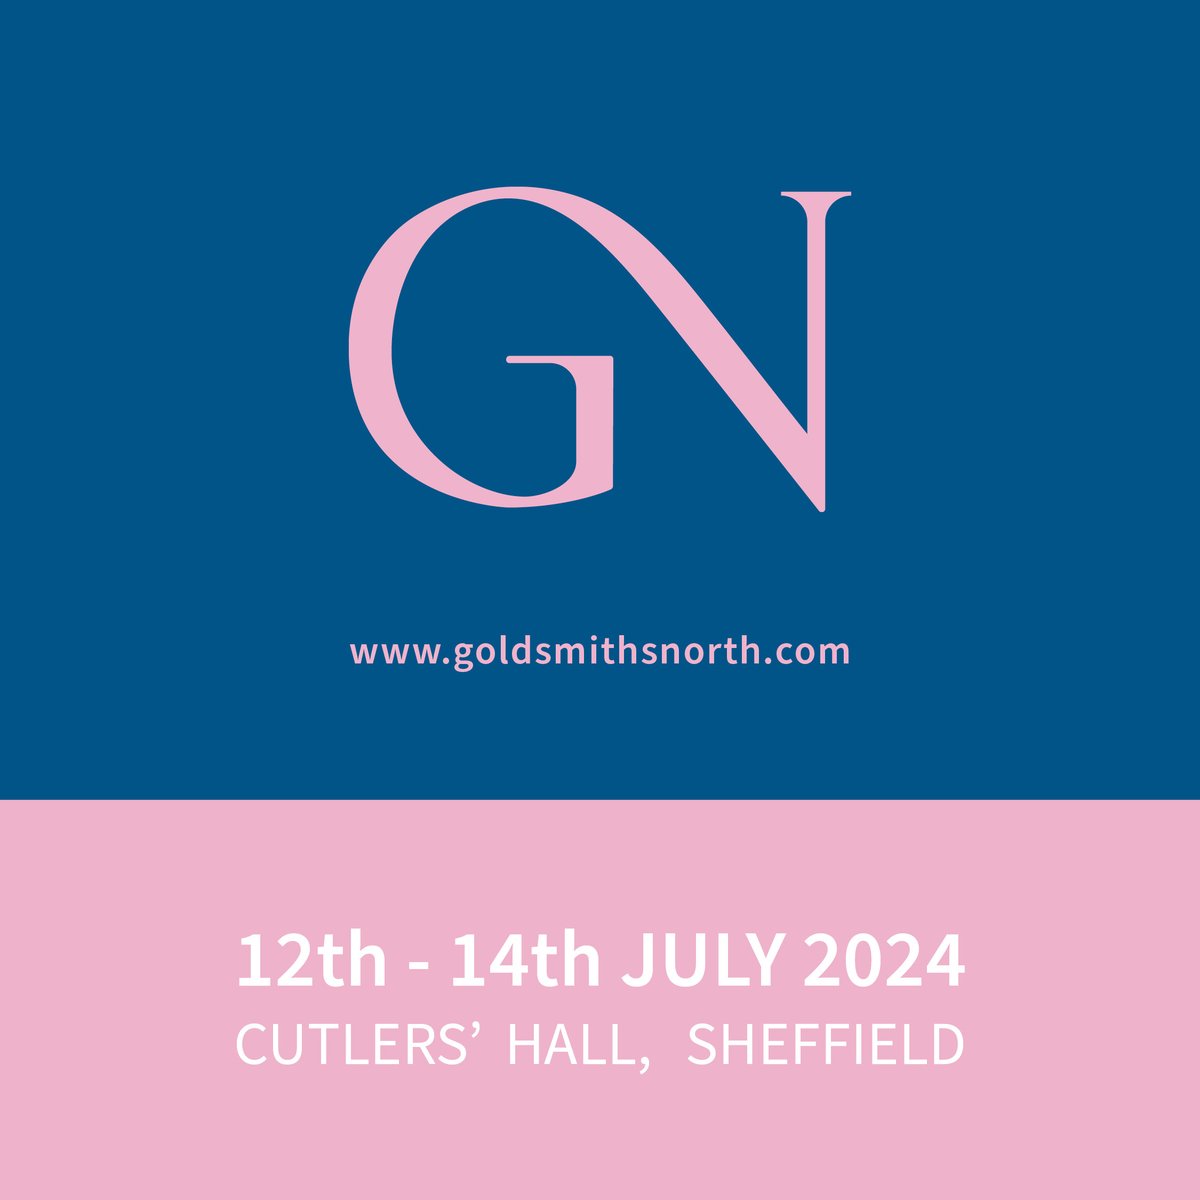 What better place than #Sheffield to host the prestigious Goldsmiths North silverware & jewellery fair? On 12-14 July 2024 with over 50 exhibitors, at the stunning @thecutlershall Not to be missed! Tickets here bit.ly/2SZwNba #sheffieldissuper #visitsheffield